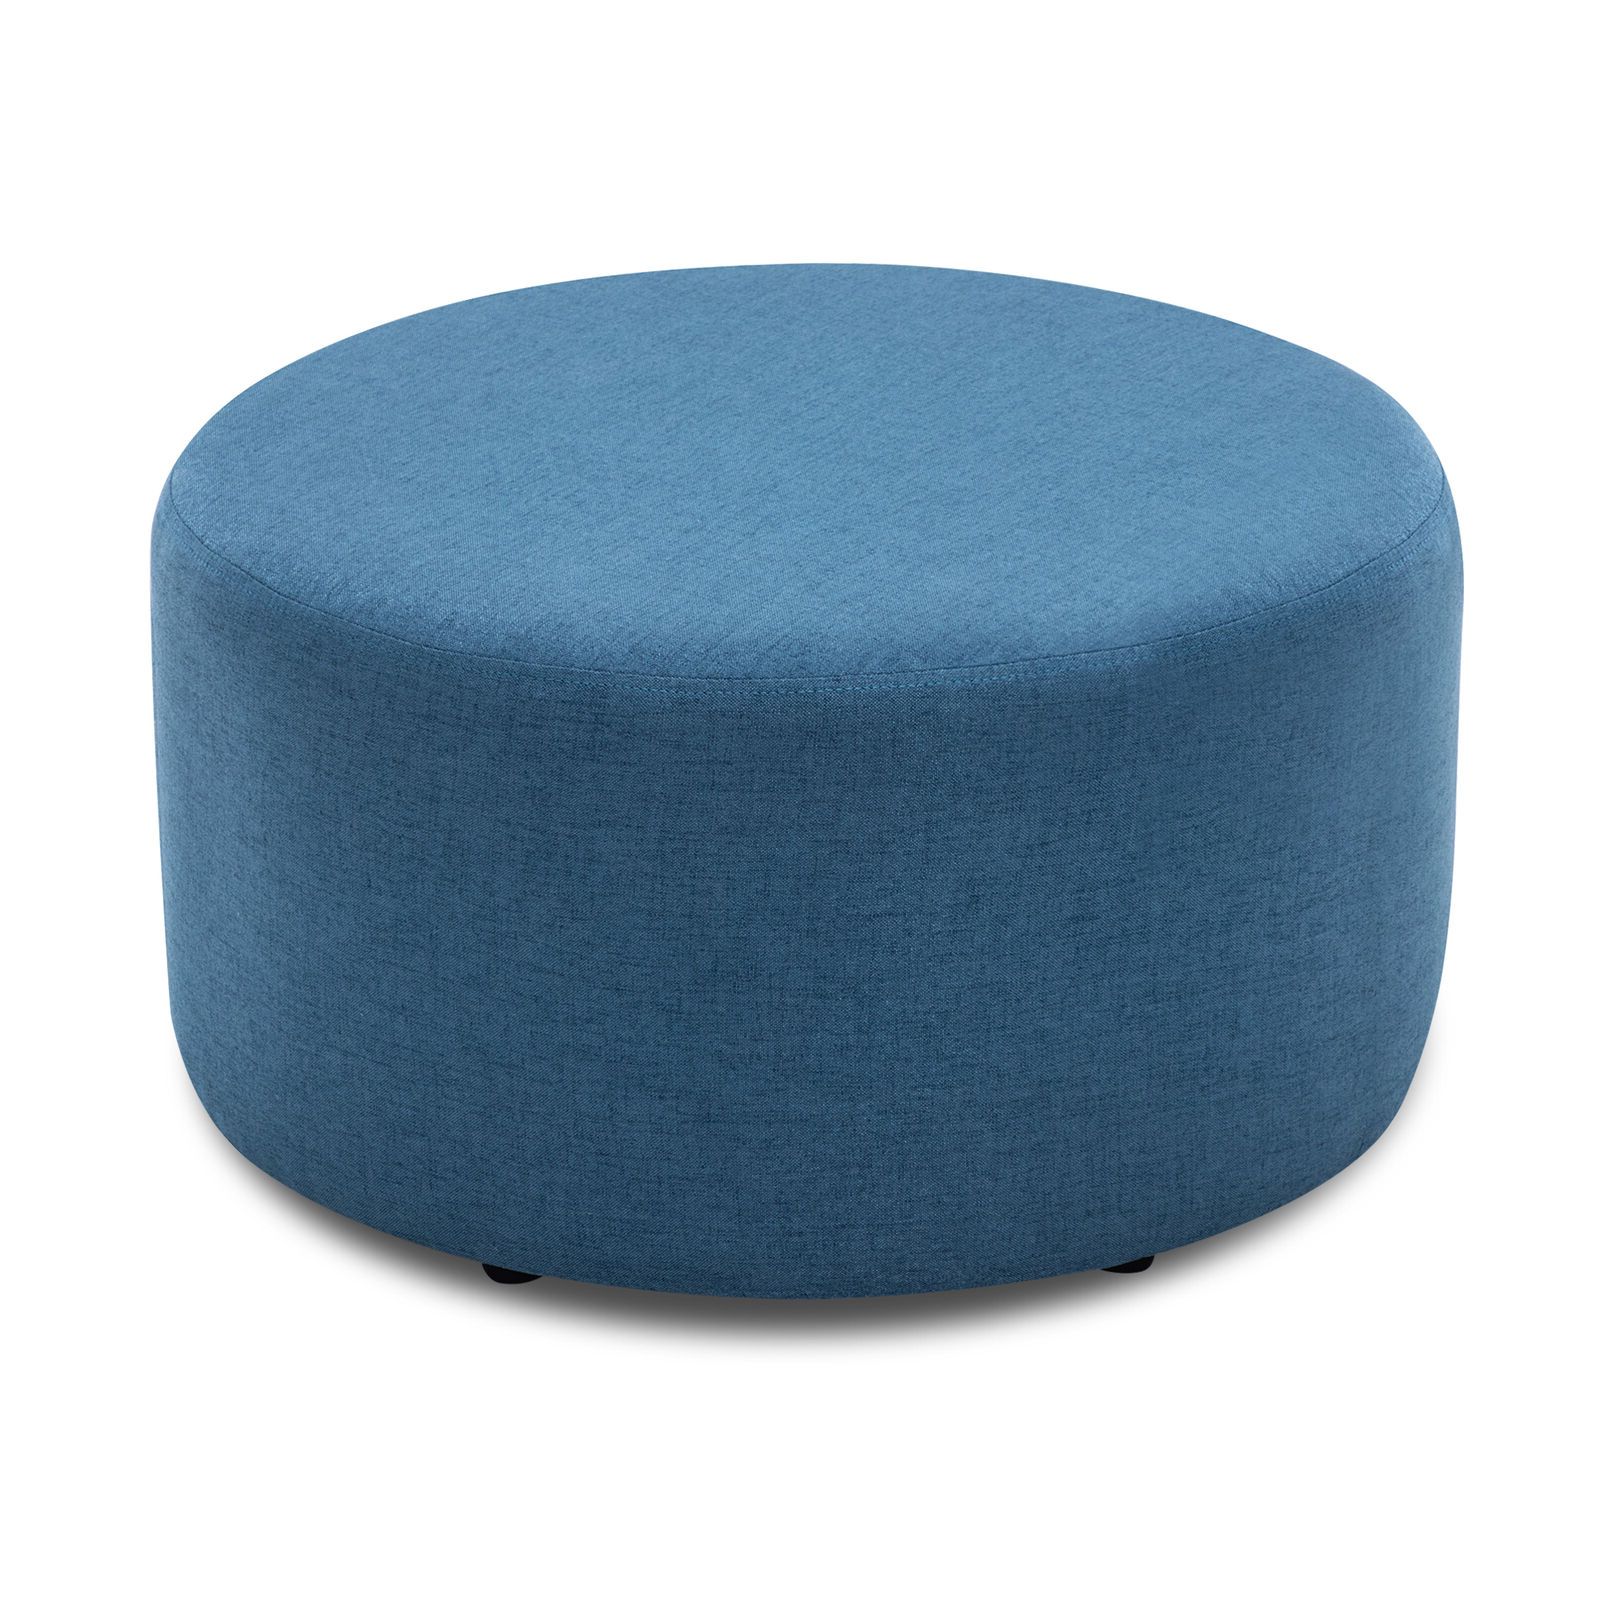 Latest 24" Round Upholstered Kiln Dried Hardwood Blue Ottoman – Affordable Regarding Pouf Textured Blue Round Pouf Ottomans (View 8 of 10)